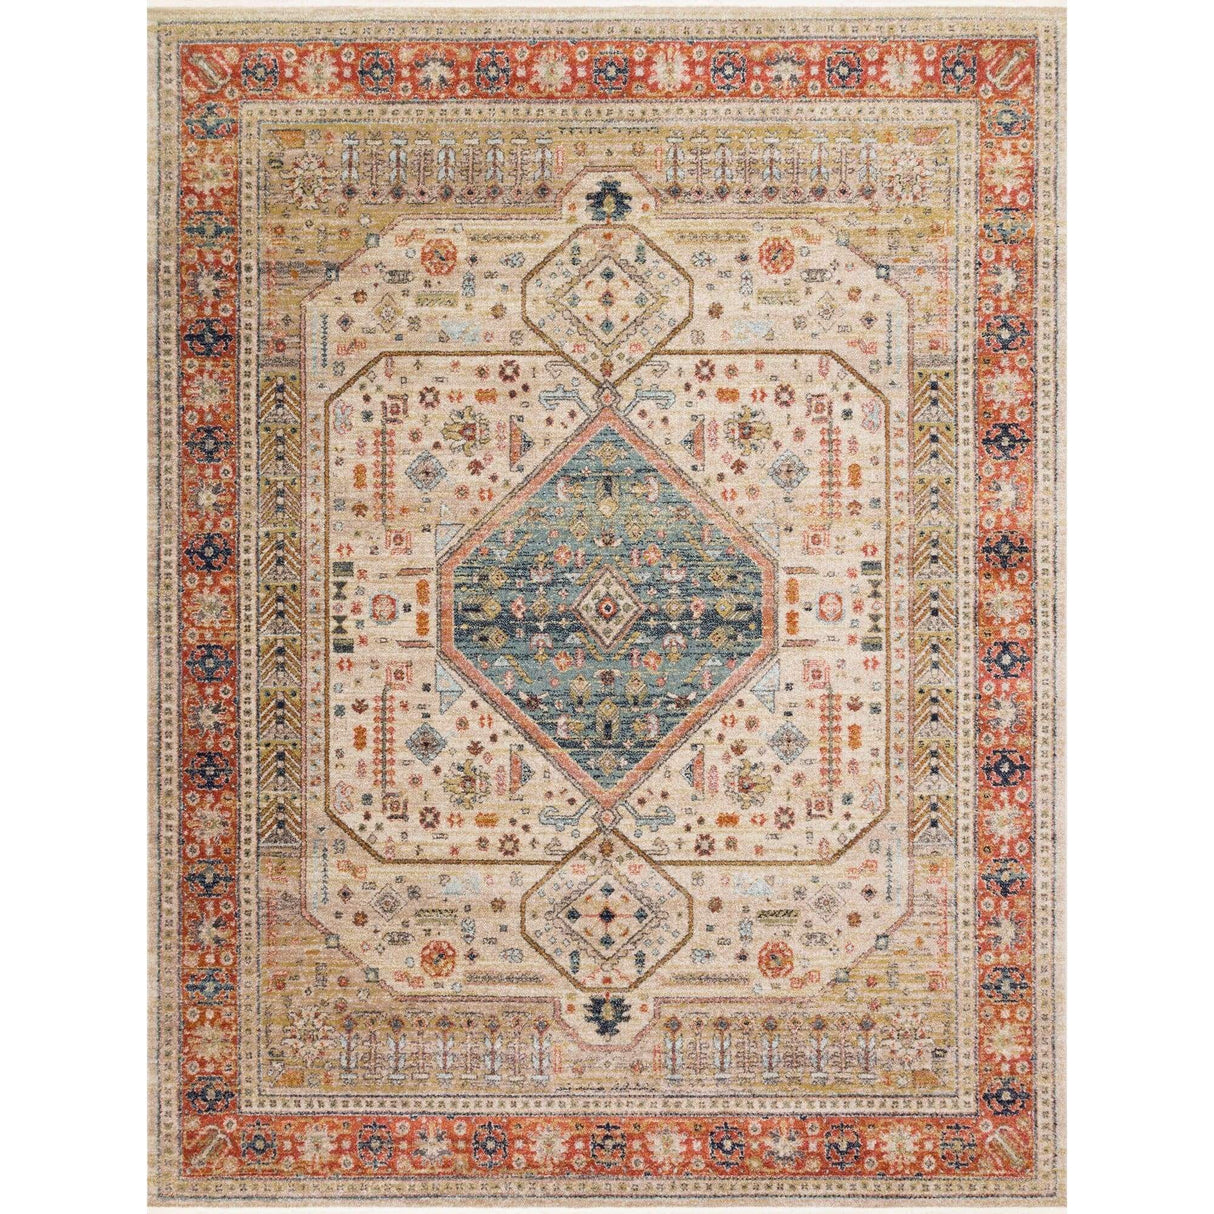 Loloi Magnolia Home Graham Rug - Persimmon/Ant. Ivory Rugs